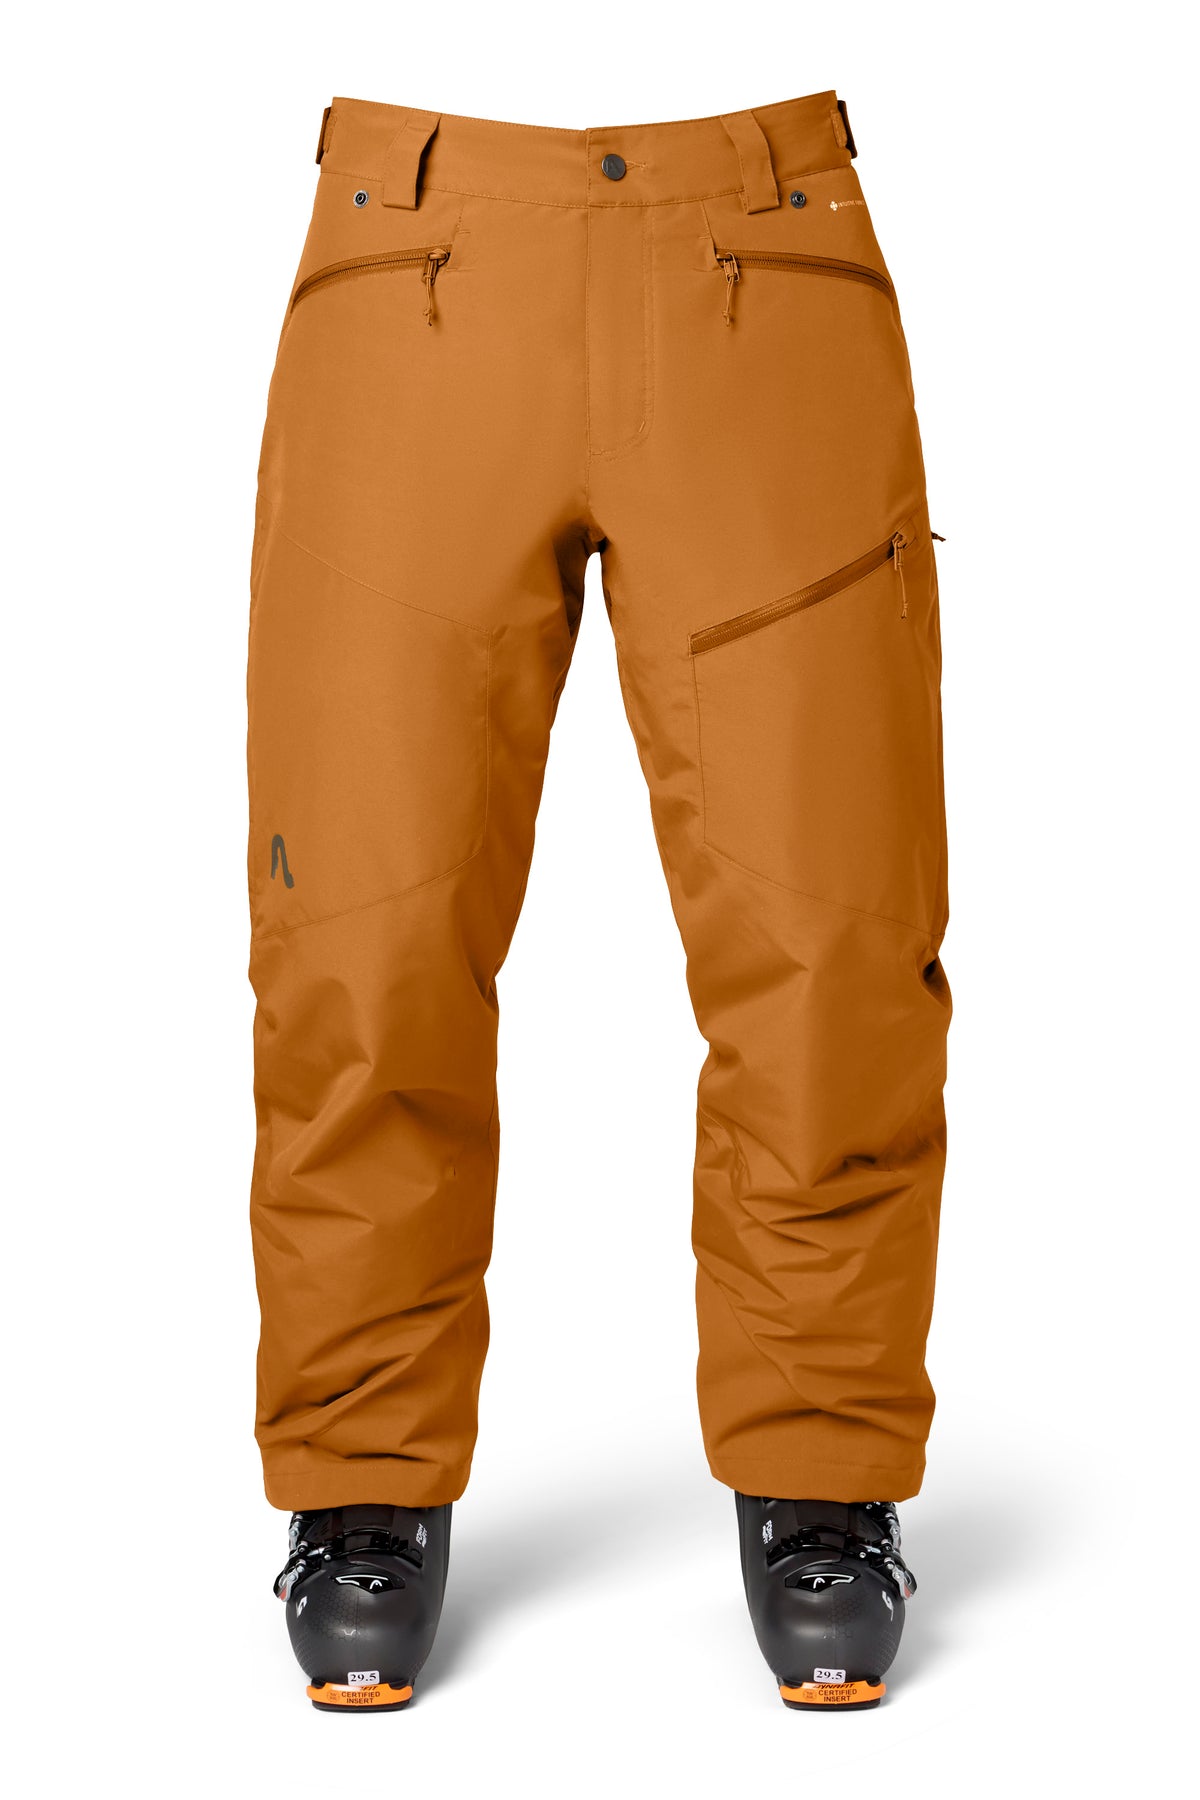 2022 Daisy Insulated Pant - Now On Sale